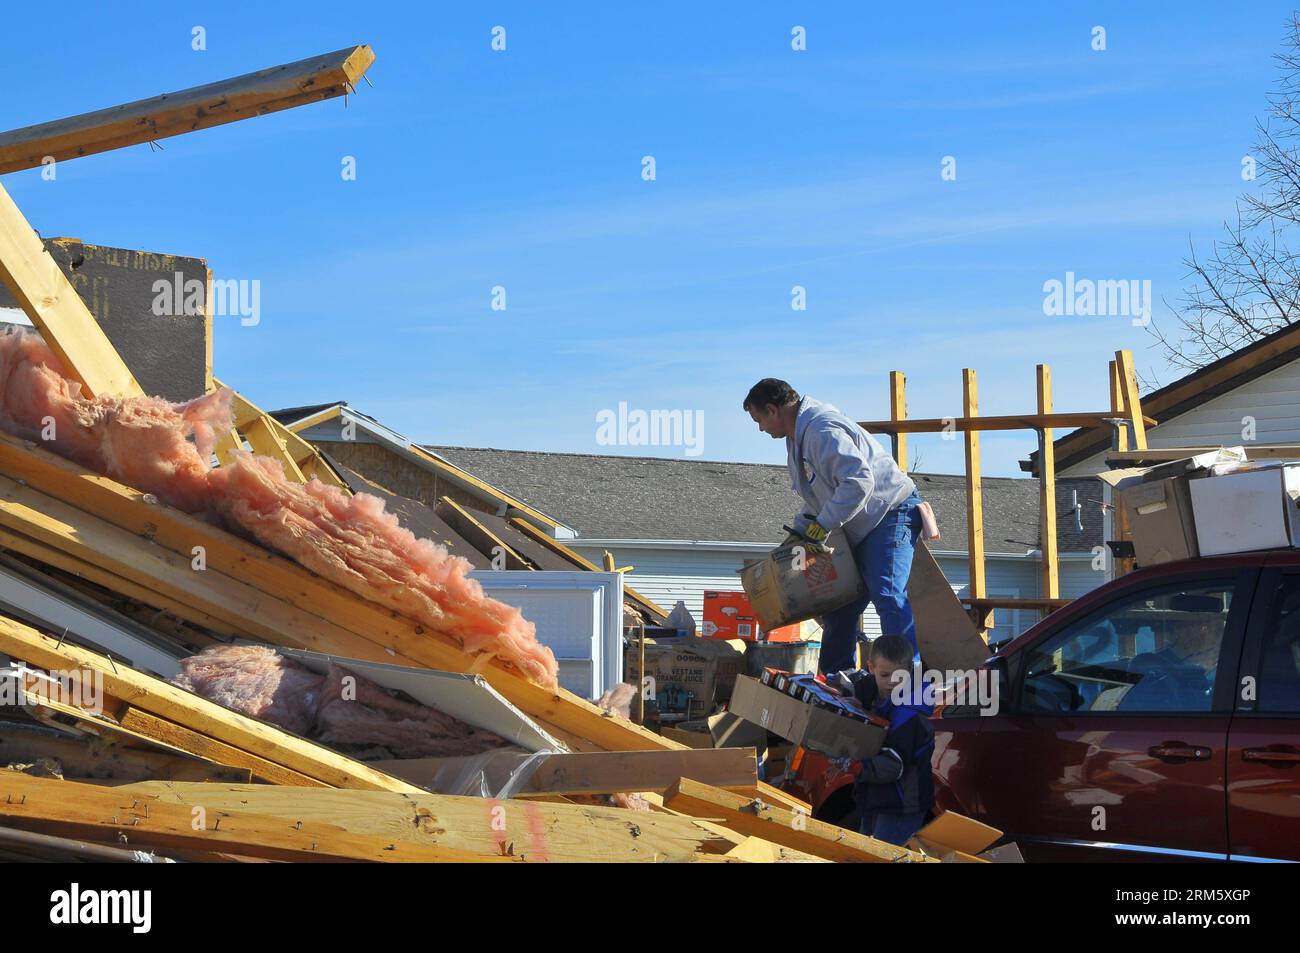 Bildnummer: 60732972  Datum: 19.11.2013  Copyright: imago/Xinhua ILLINOIS, Nov. 19, 2013 (Xinhua) -- Local residents work in ruins after a tornado attack in the town of Washington in Illinois, the United States, on Nov. 19, 2013. At least 16 were killed during tornado attacks on Sunday, according to the National Weather Service. (Xinhua/Zhang Baoping)(ybg) US-ILLINOIS-TORNADO PUBLICATIONxNOTxINxCHN Gesellschaft USA Naturkatastrophe x0x xsk 2013 quer     60732972 Date 19 11 2013 Copyright Imago XINHUA Illinois Nov 19 2013 XINHUA Local Residents Work in Ruins After a Tornado Attack in The Town o Stock Photo